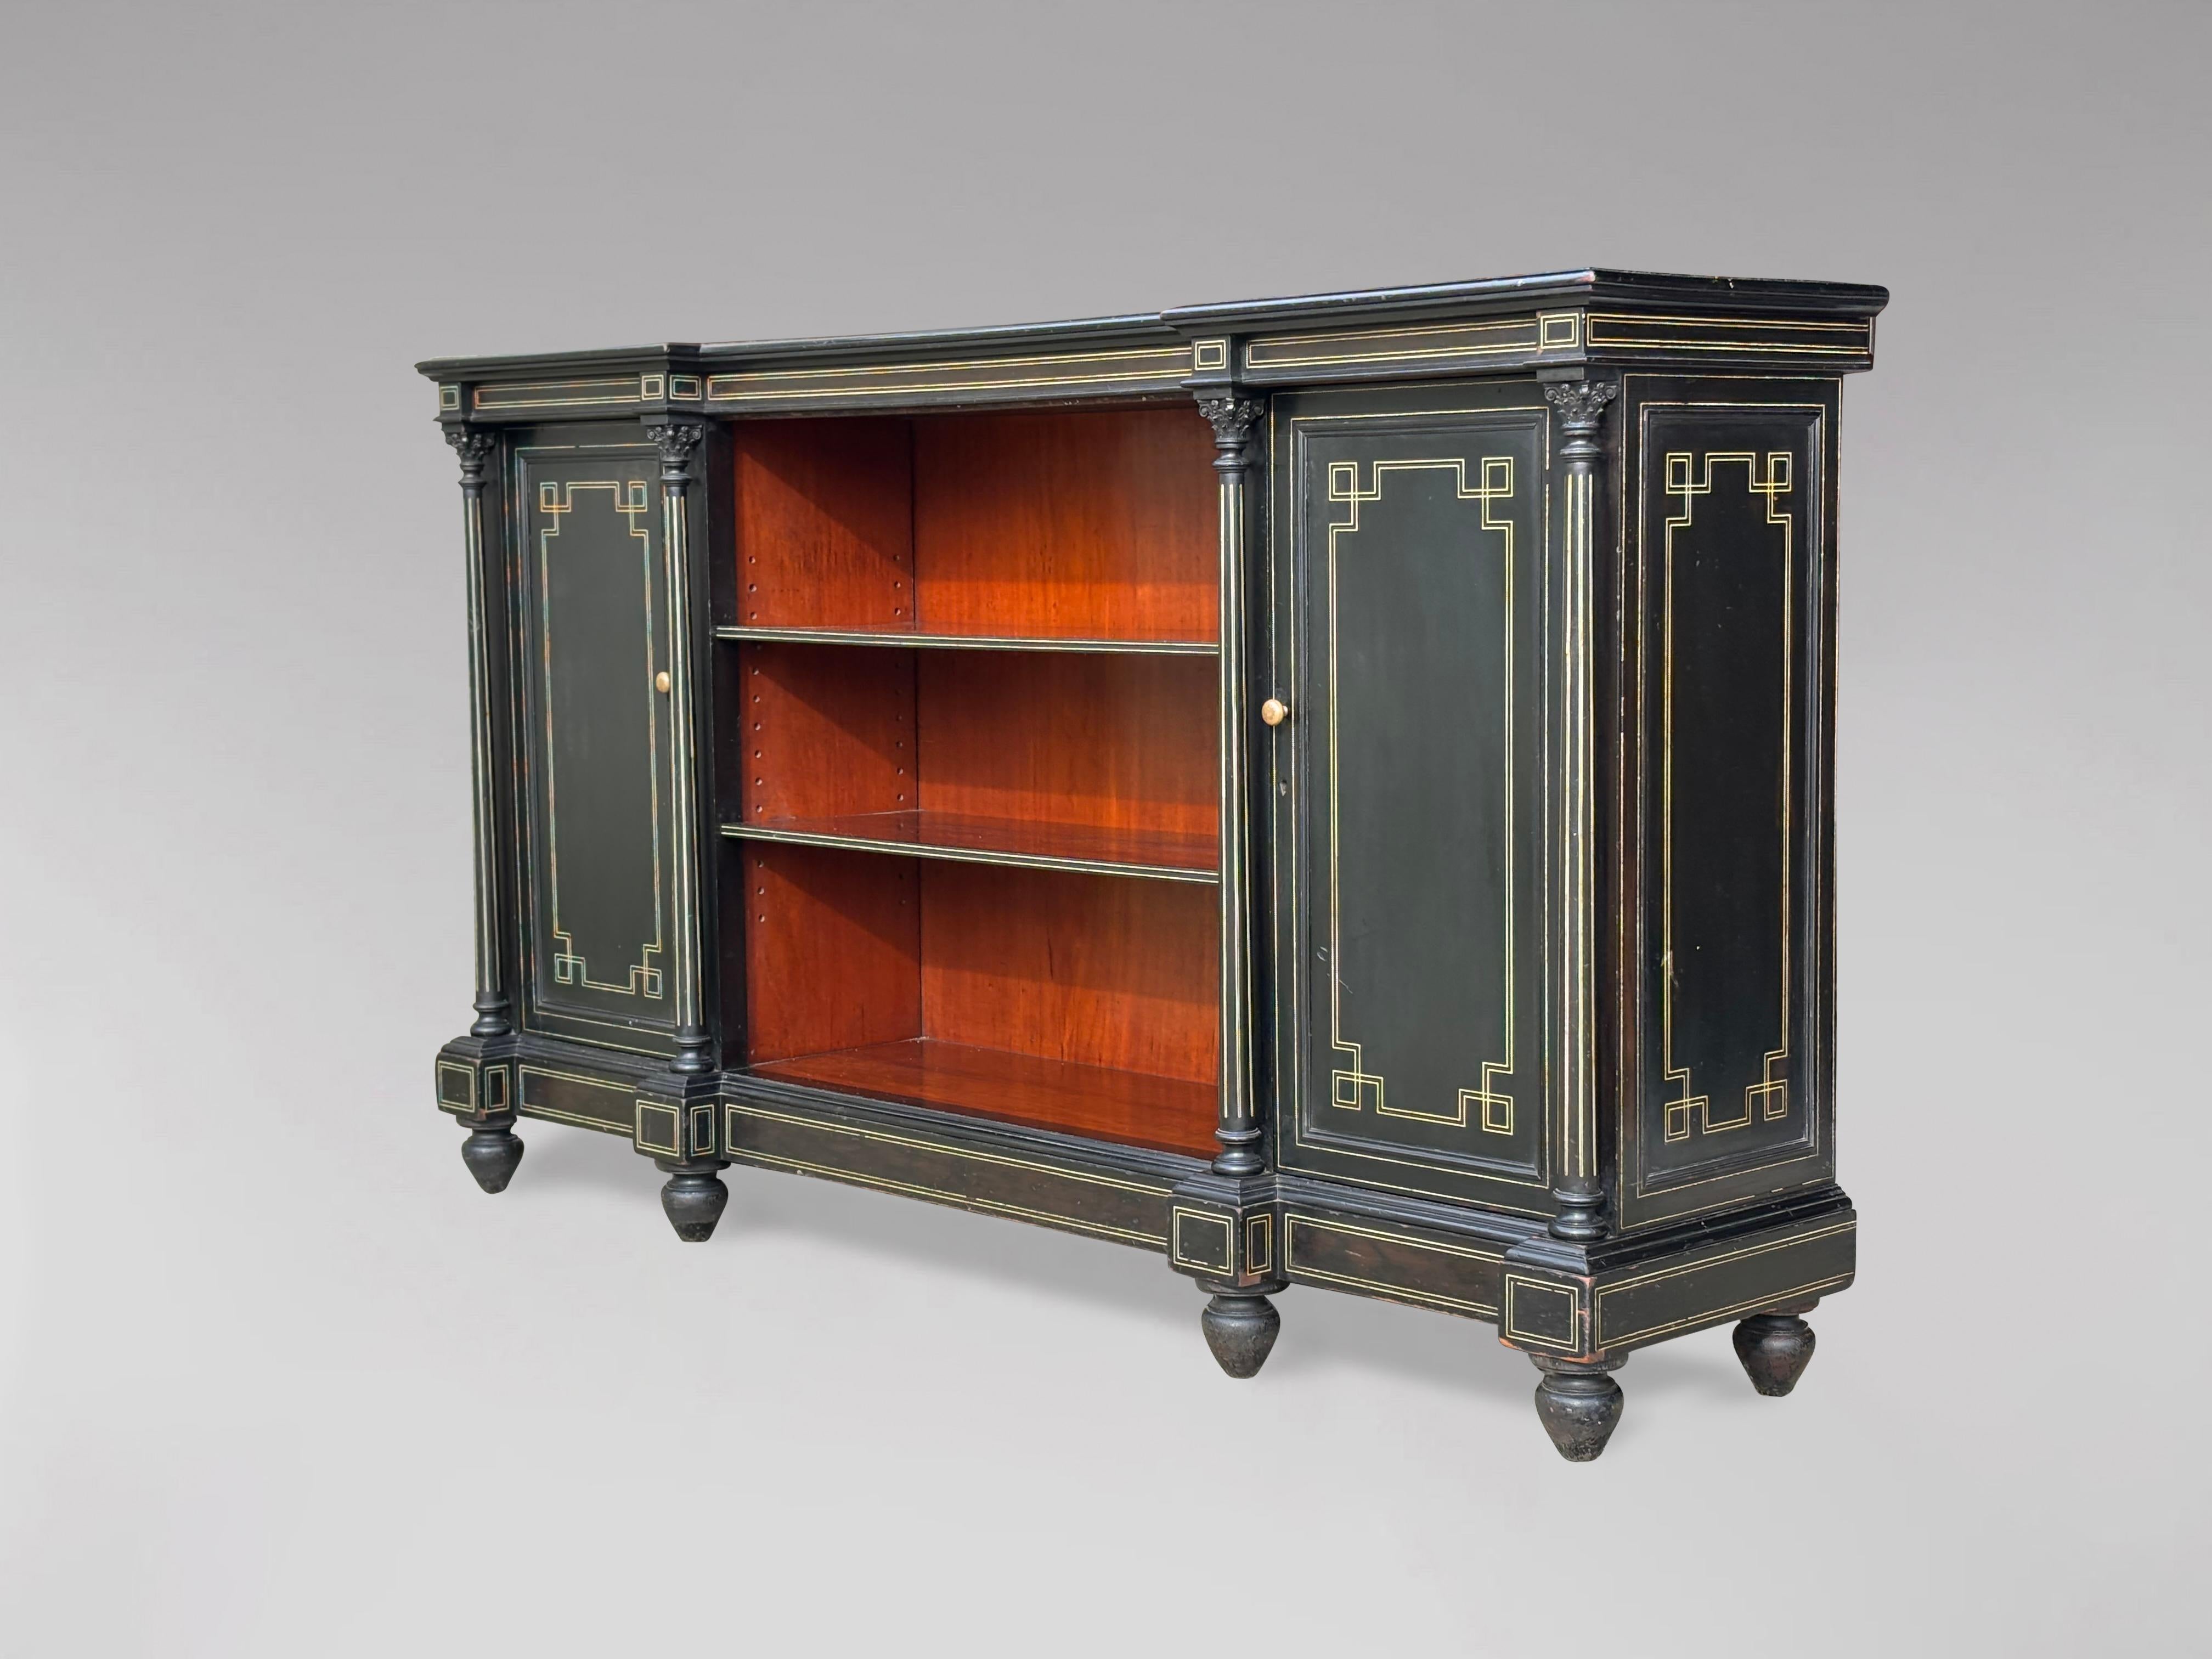 A fine and very decorative late 19th century French ebonised & bone inlay enfilade, buffet or sideboard. Moulded and bone inlay shaped top above an open central section with two adjustable shelves, flanked by inlaid panelled doored cabinets, four